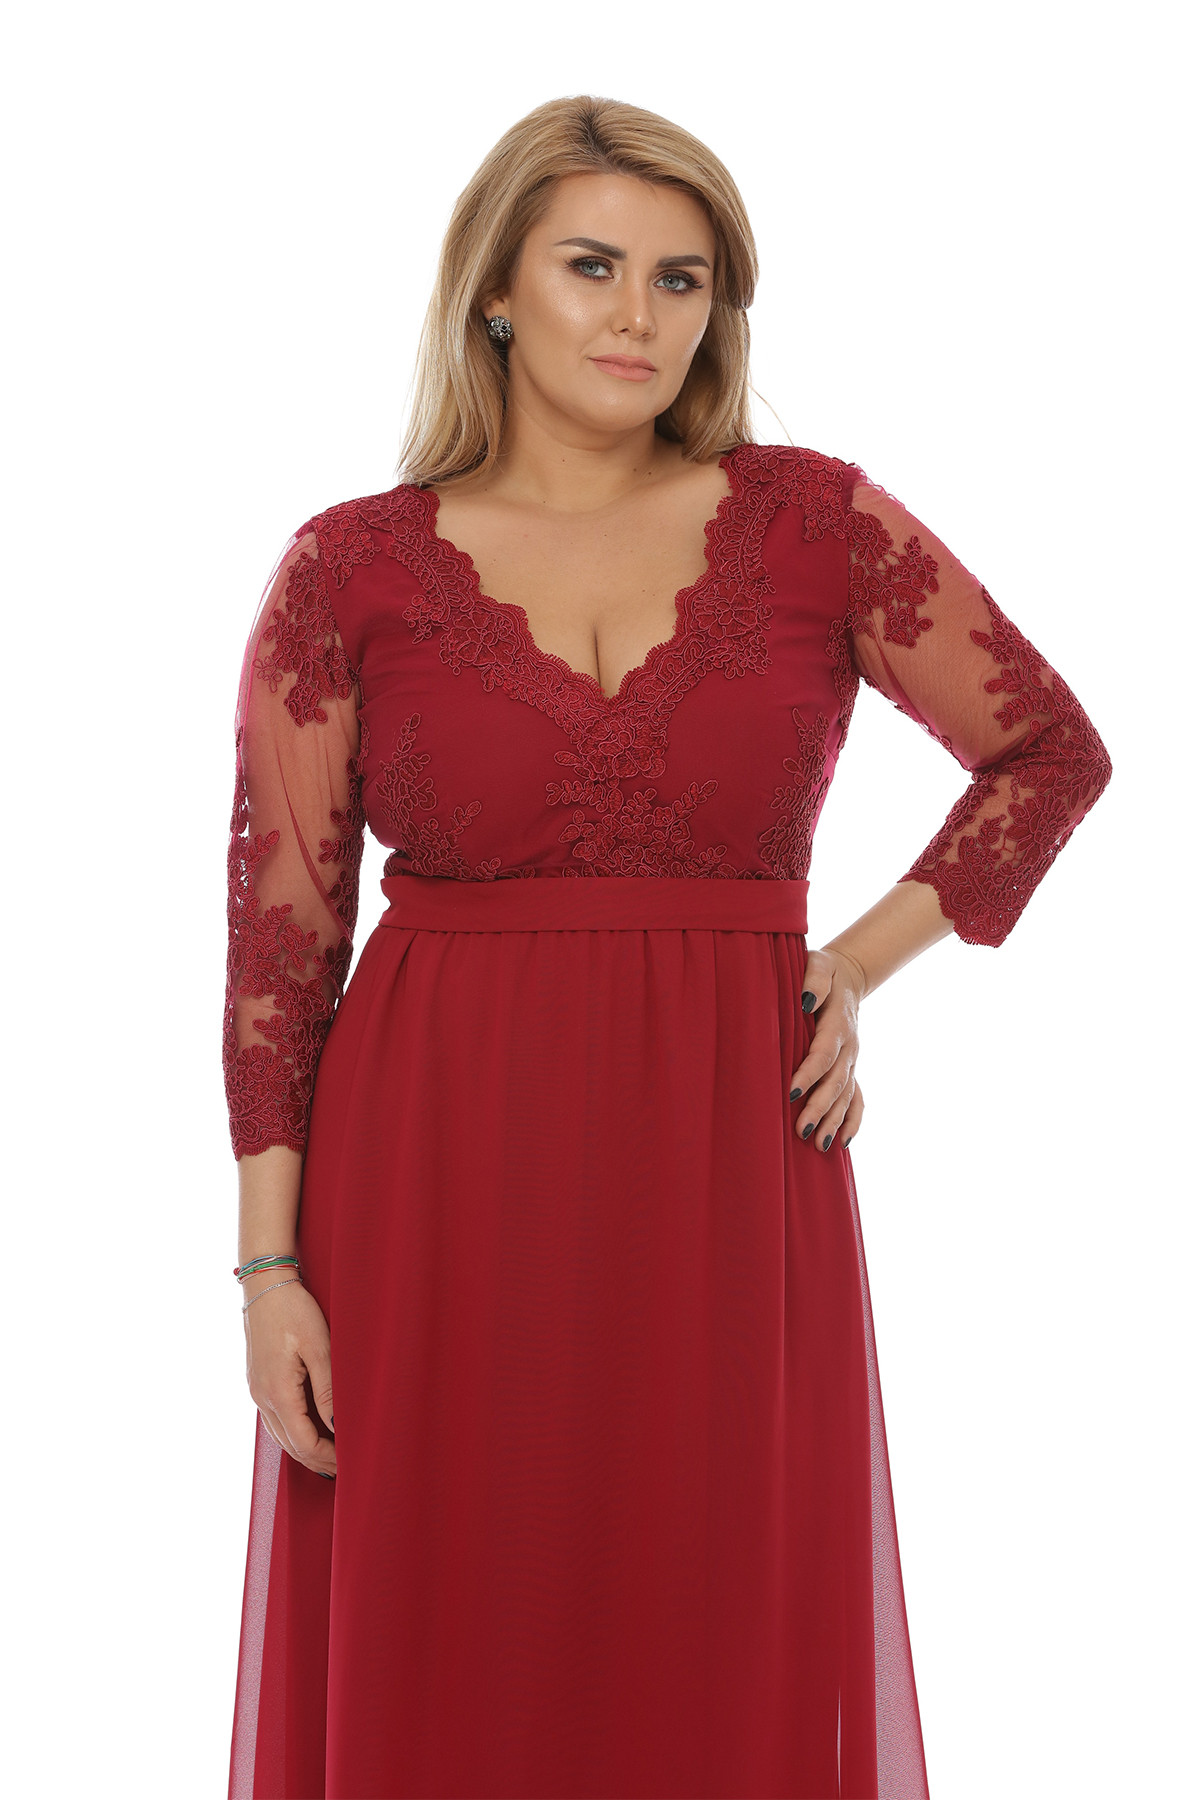 Pay attention to I've acknowledged ebb tide Rochie Plus Size Dian Bordo - Rochie de seara lunga - Miss Grey!